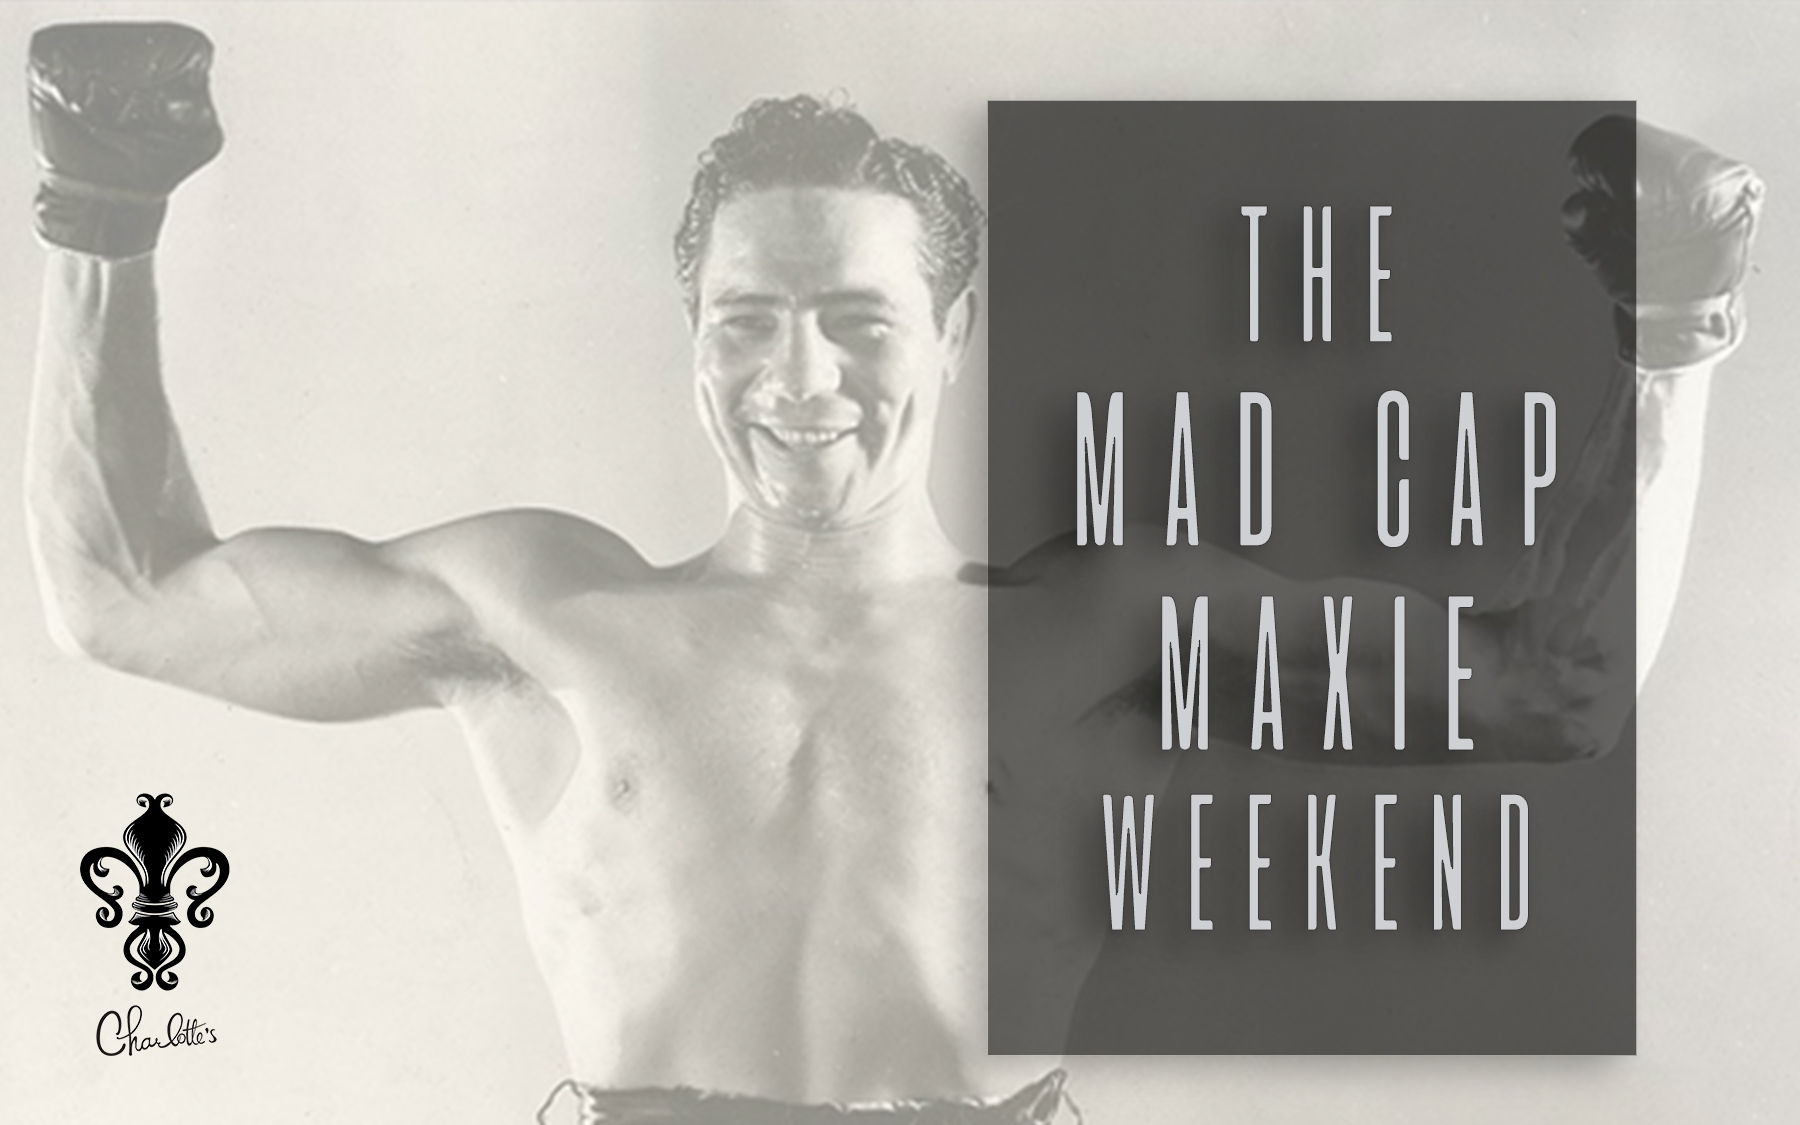 The Mad Cap Maxie Weekend